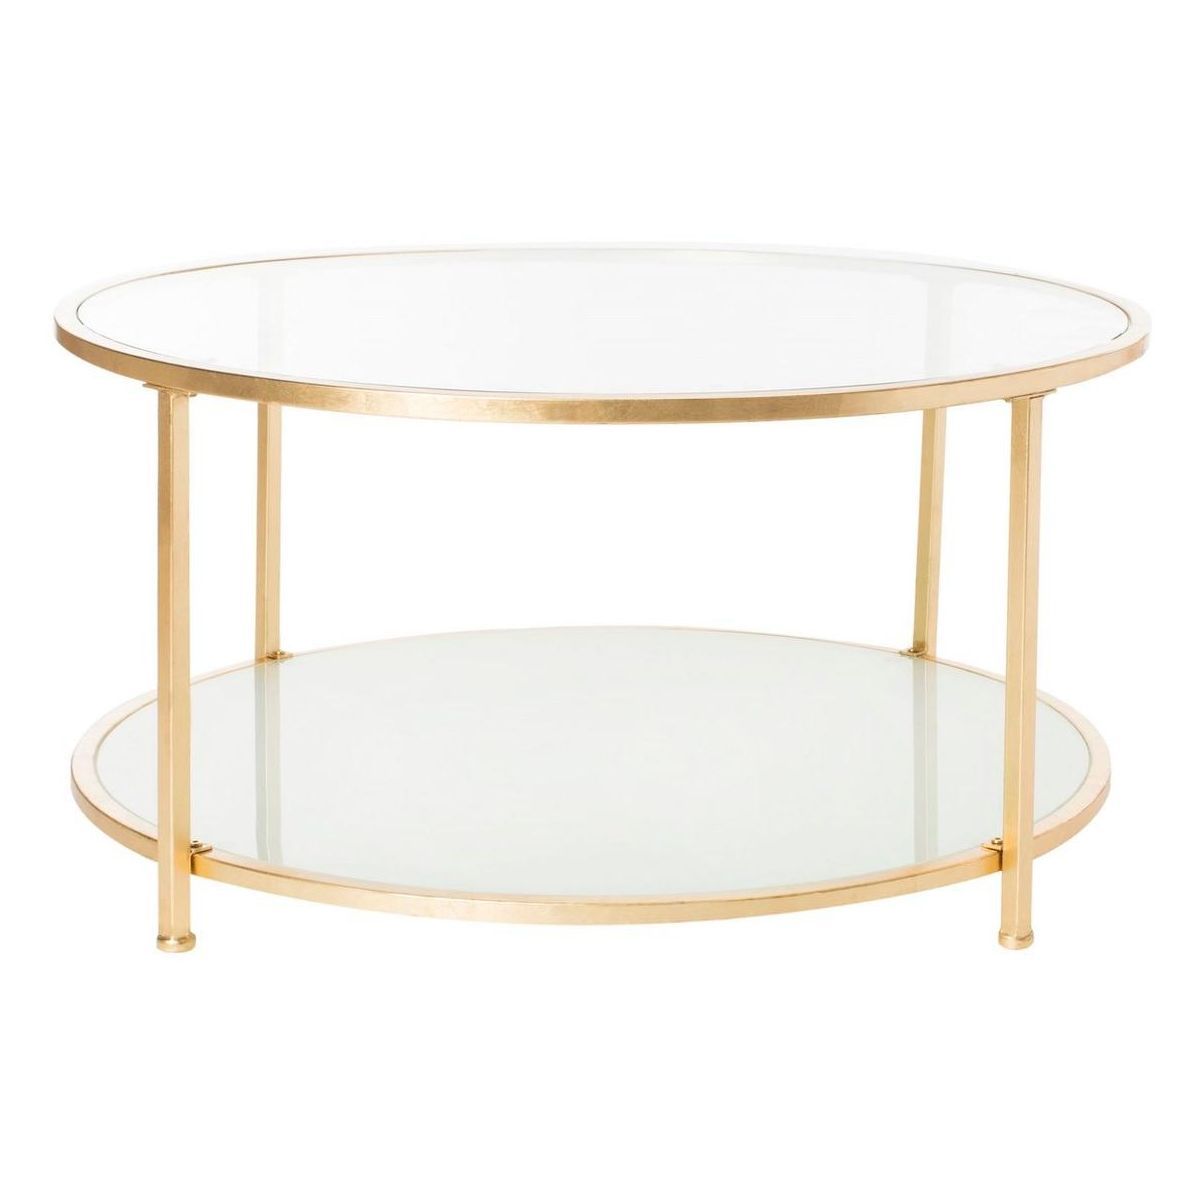 Ivy 2 Tier Round Coffee Table - Glass/Gold Foil - Safavieh | Target